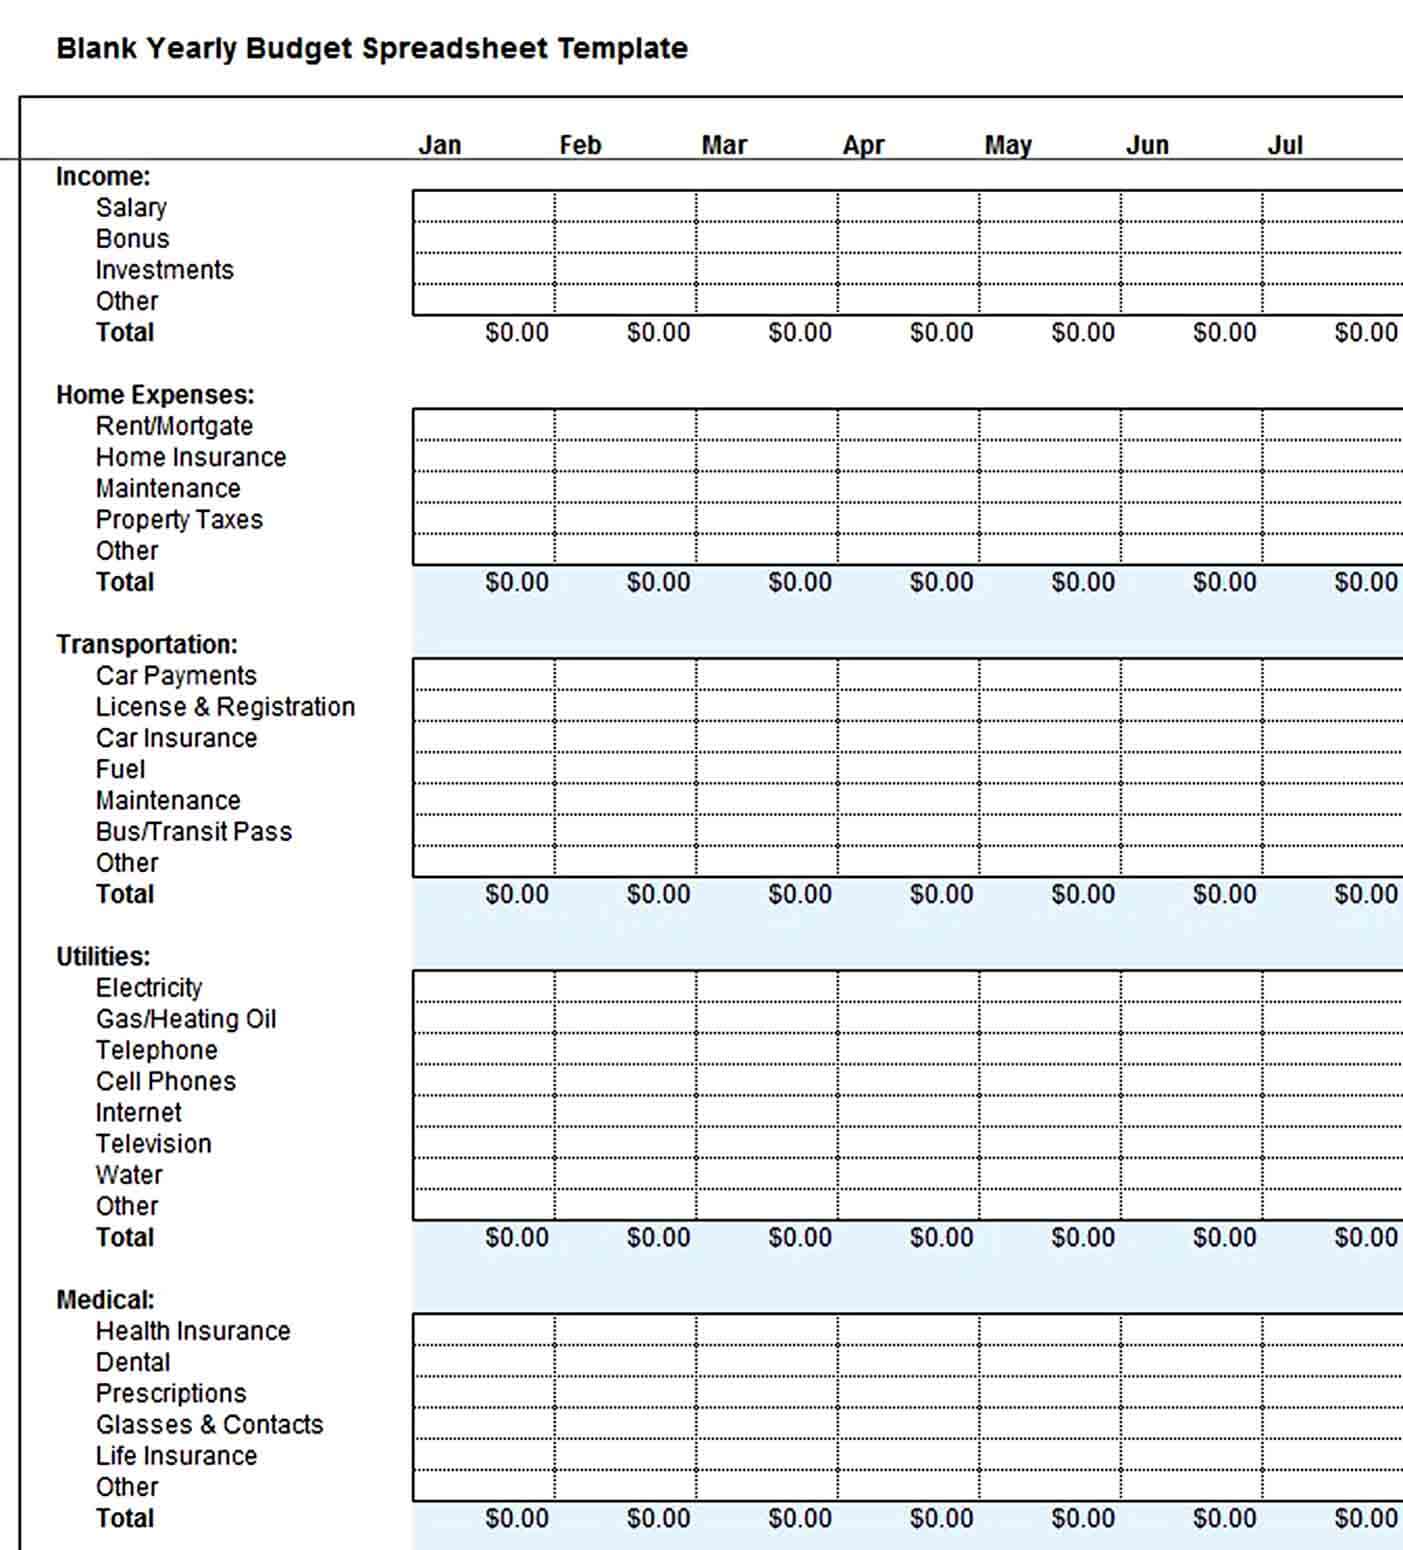 blank yearly budget spreadsheet template